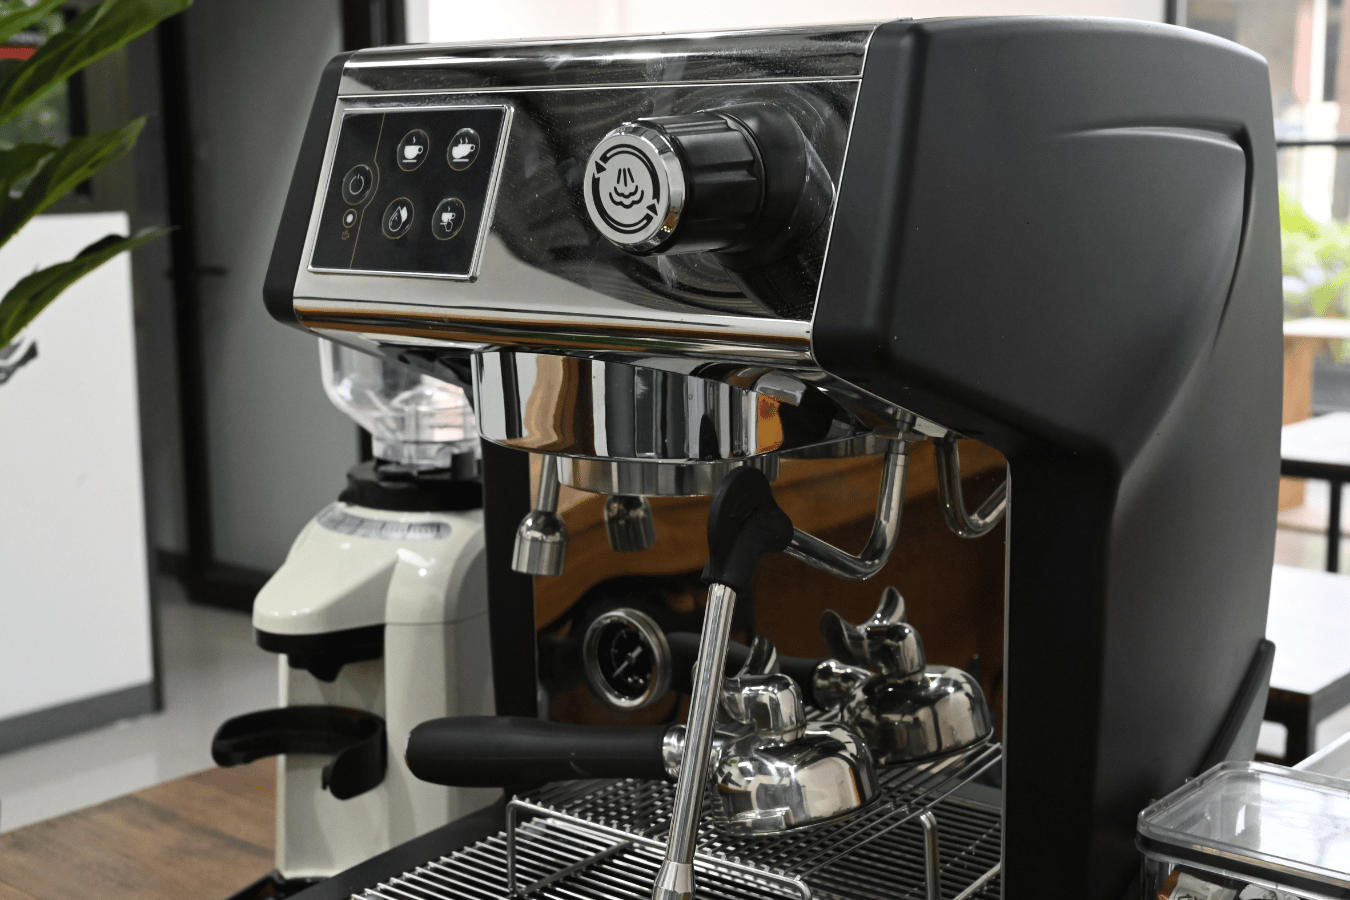 A coffee machine is sitting on a counter next to a grinder.